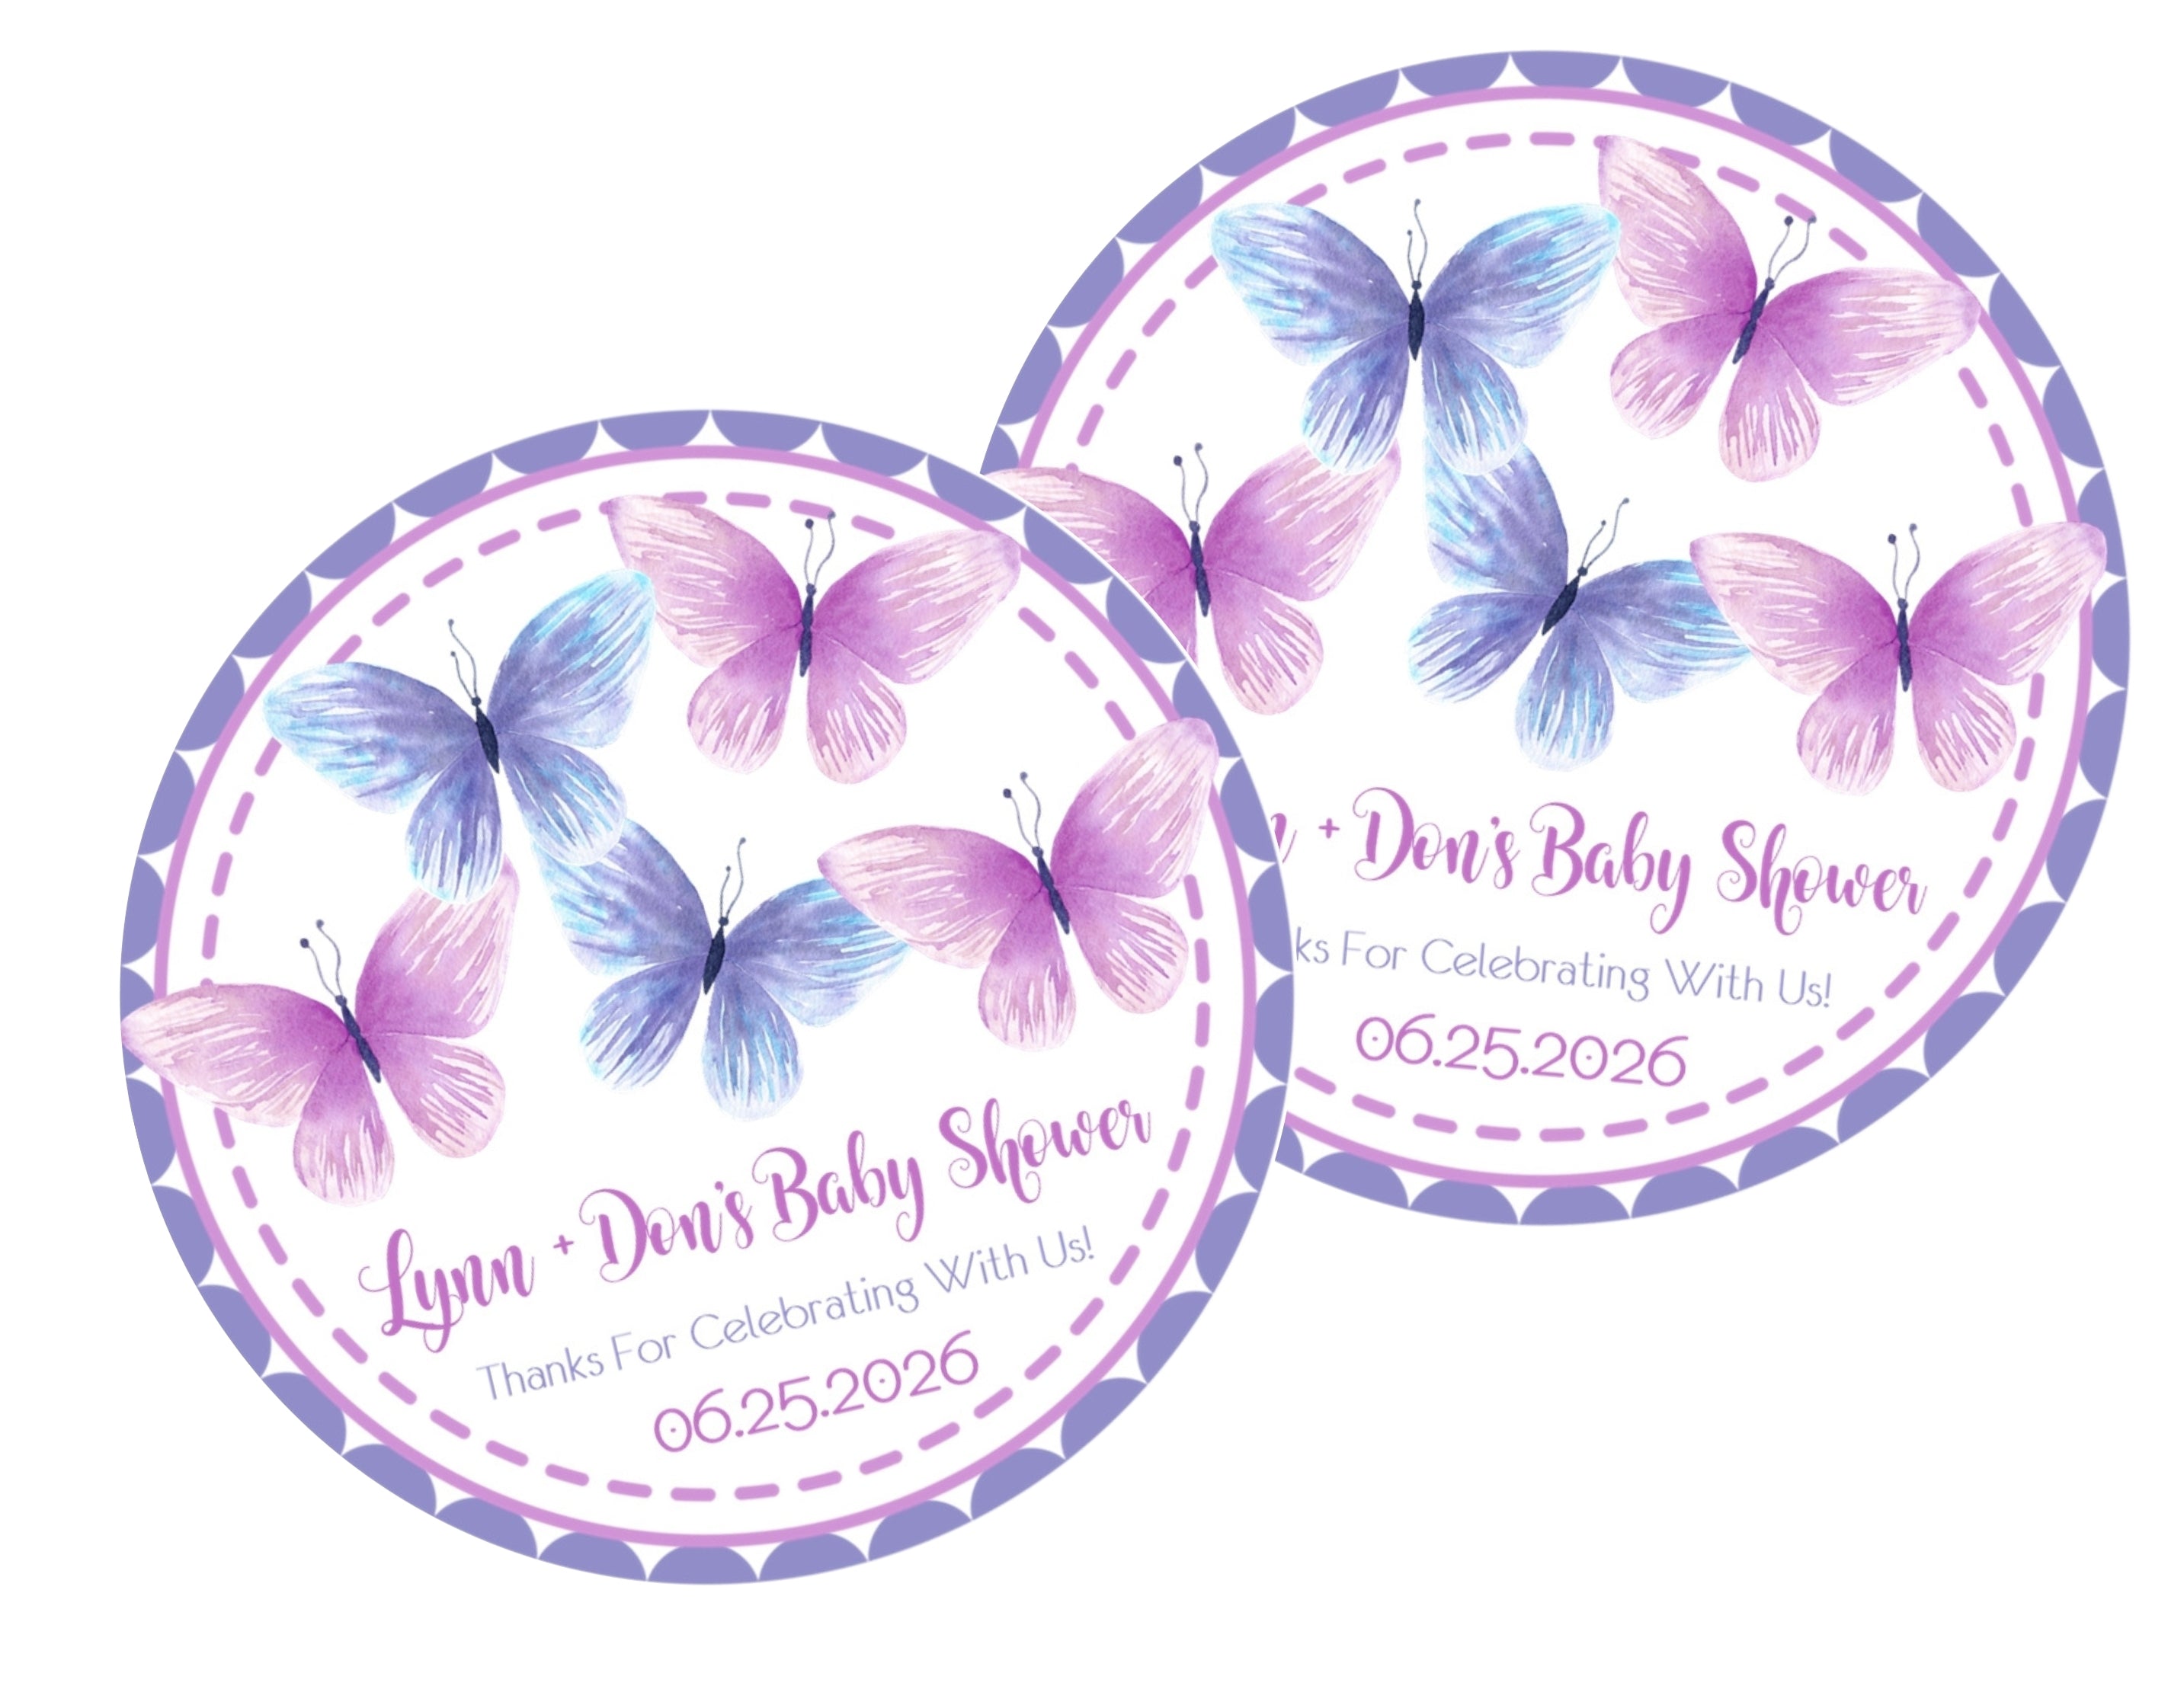 Butterfly Baby Shower Stickers Or Favor Tags